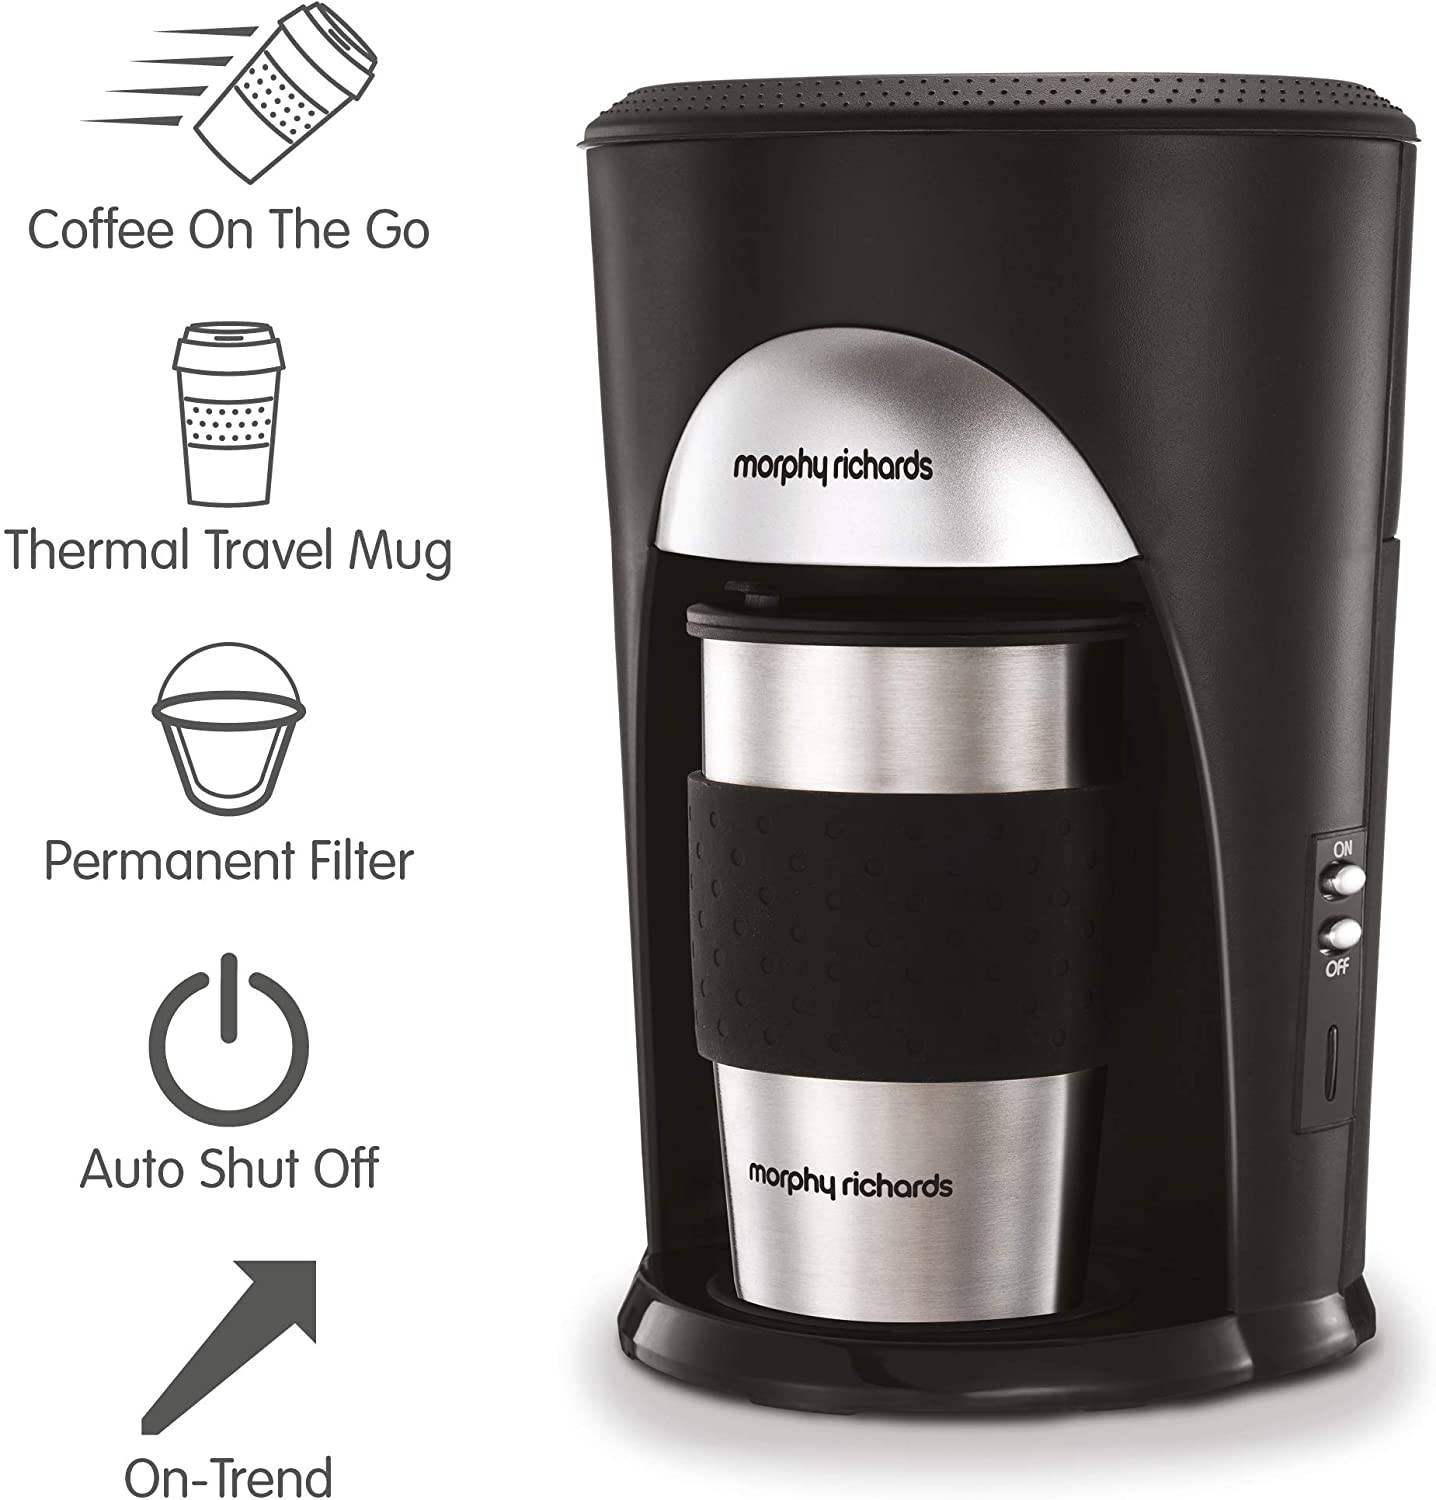 Morphy Richards 162740 On The Go Filter Coffee Machine - Black/ Brushed Steel